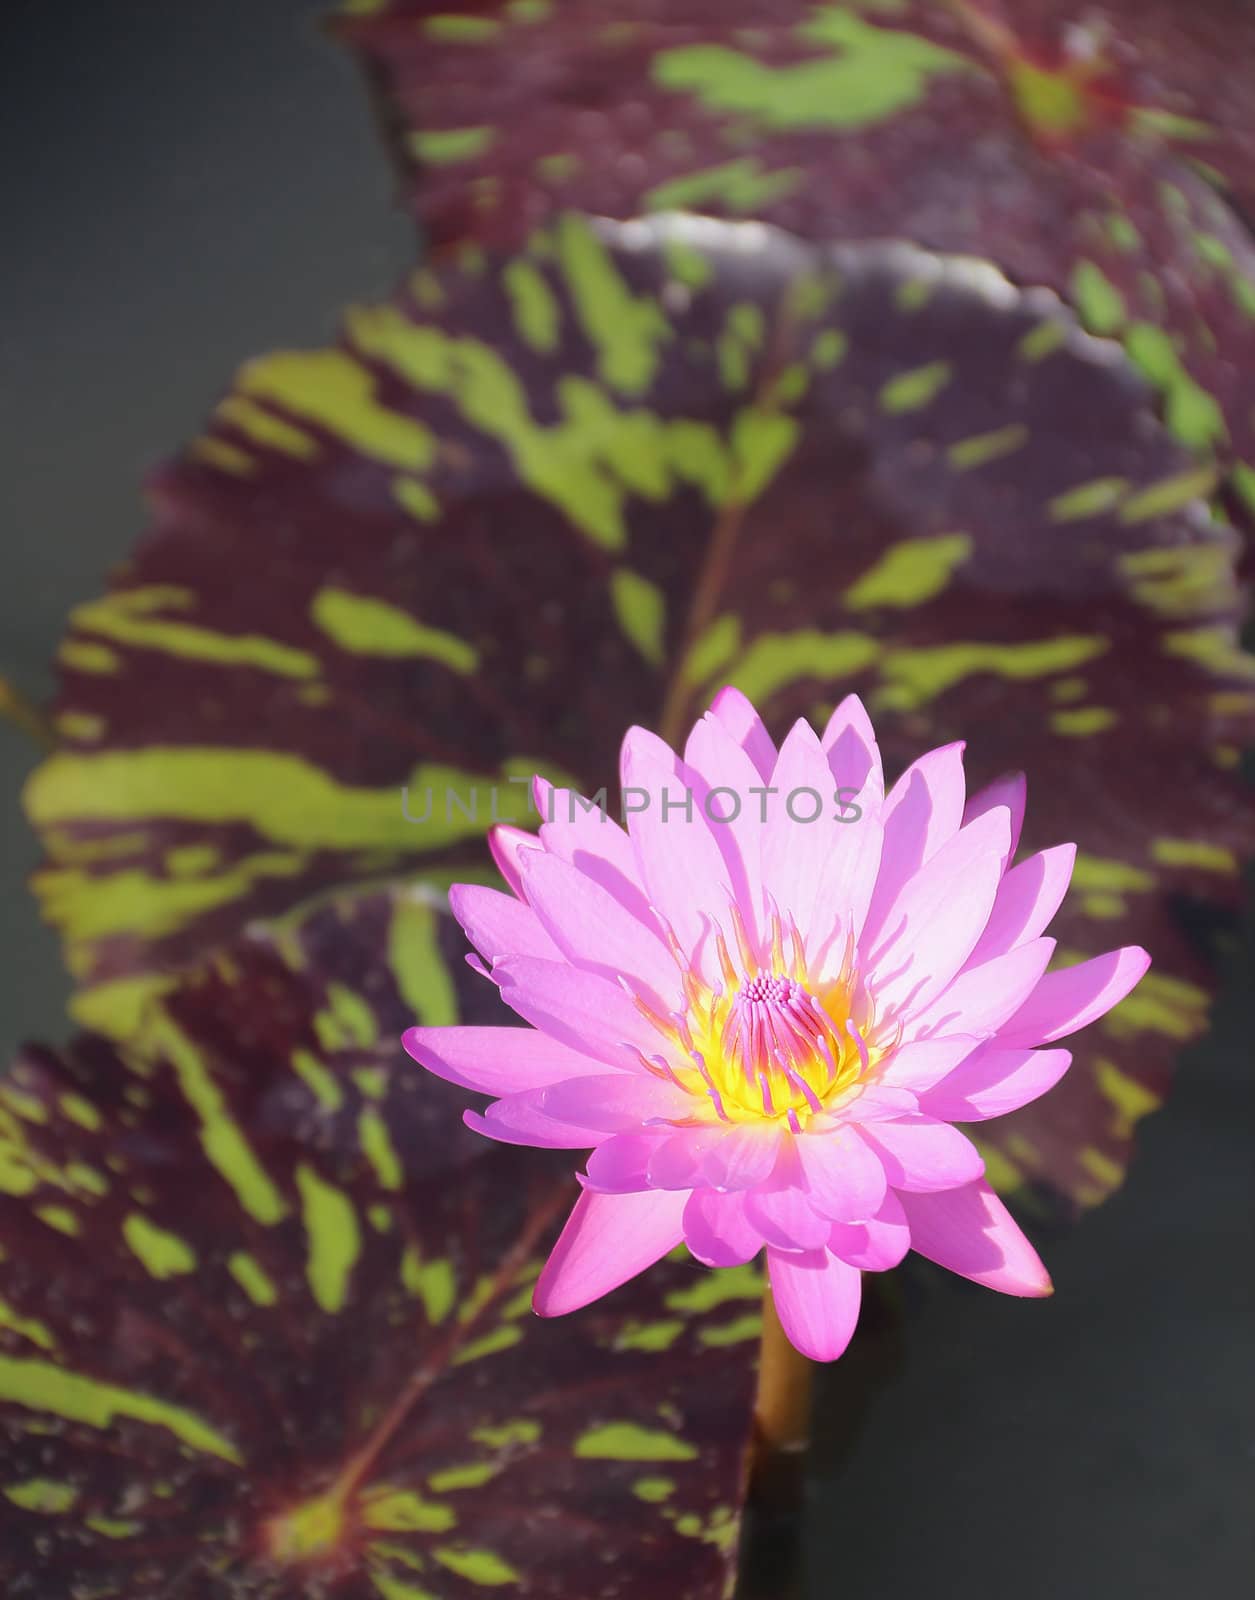 A pink water lily in a pond